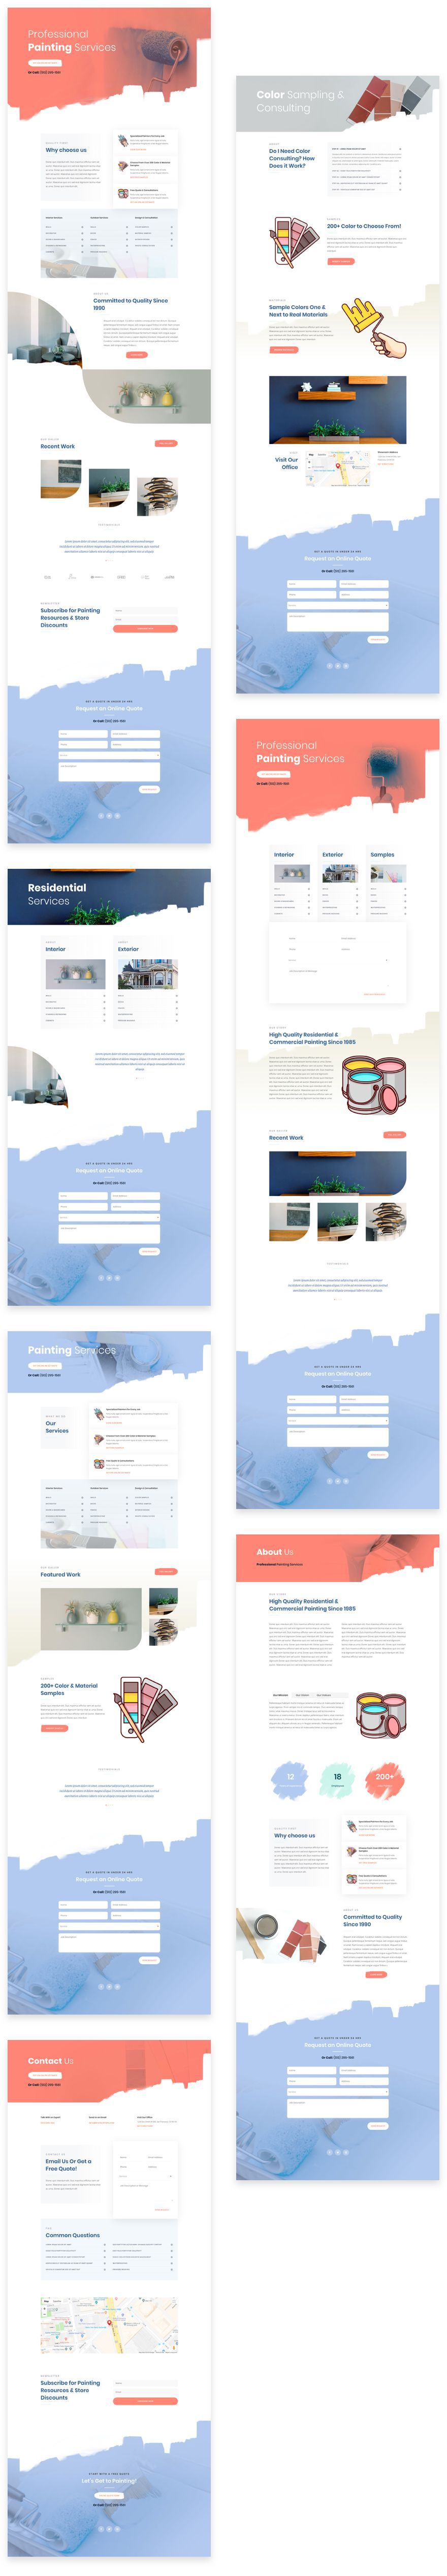 Painting Services Divi Layout Pack